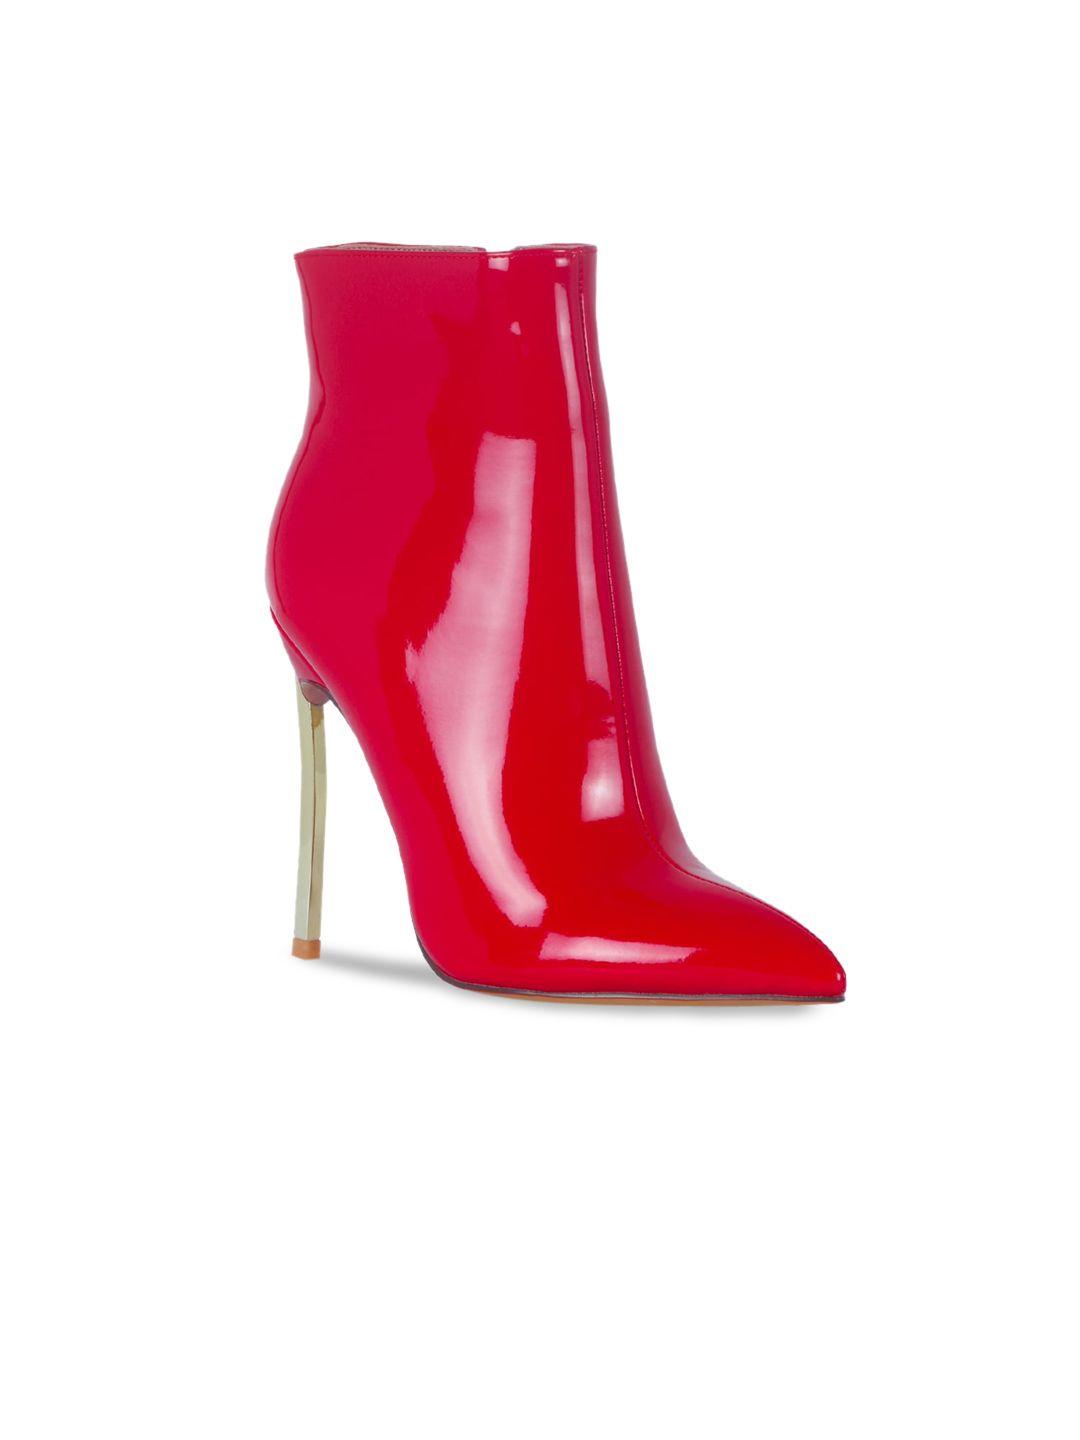 london rag red party stiletto heeled boots